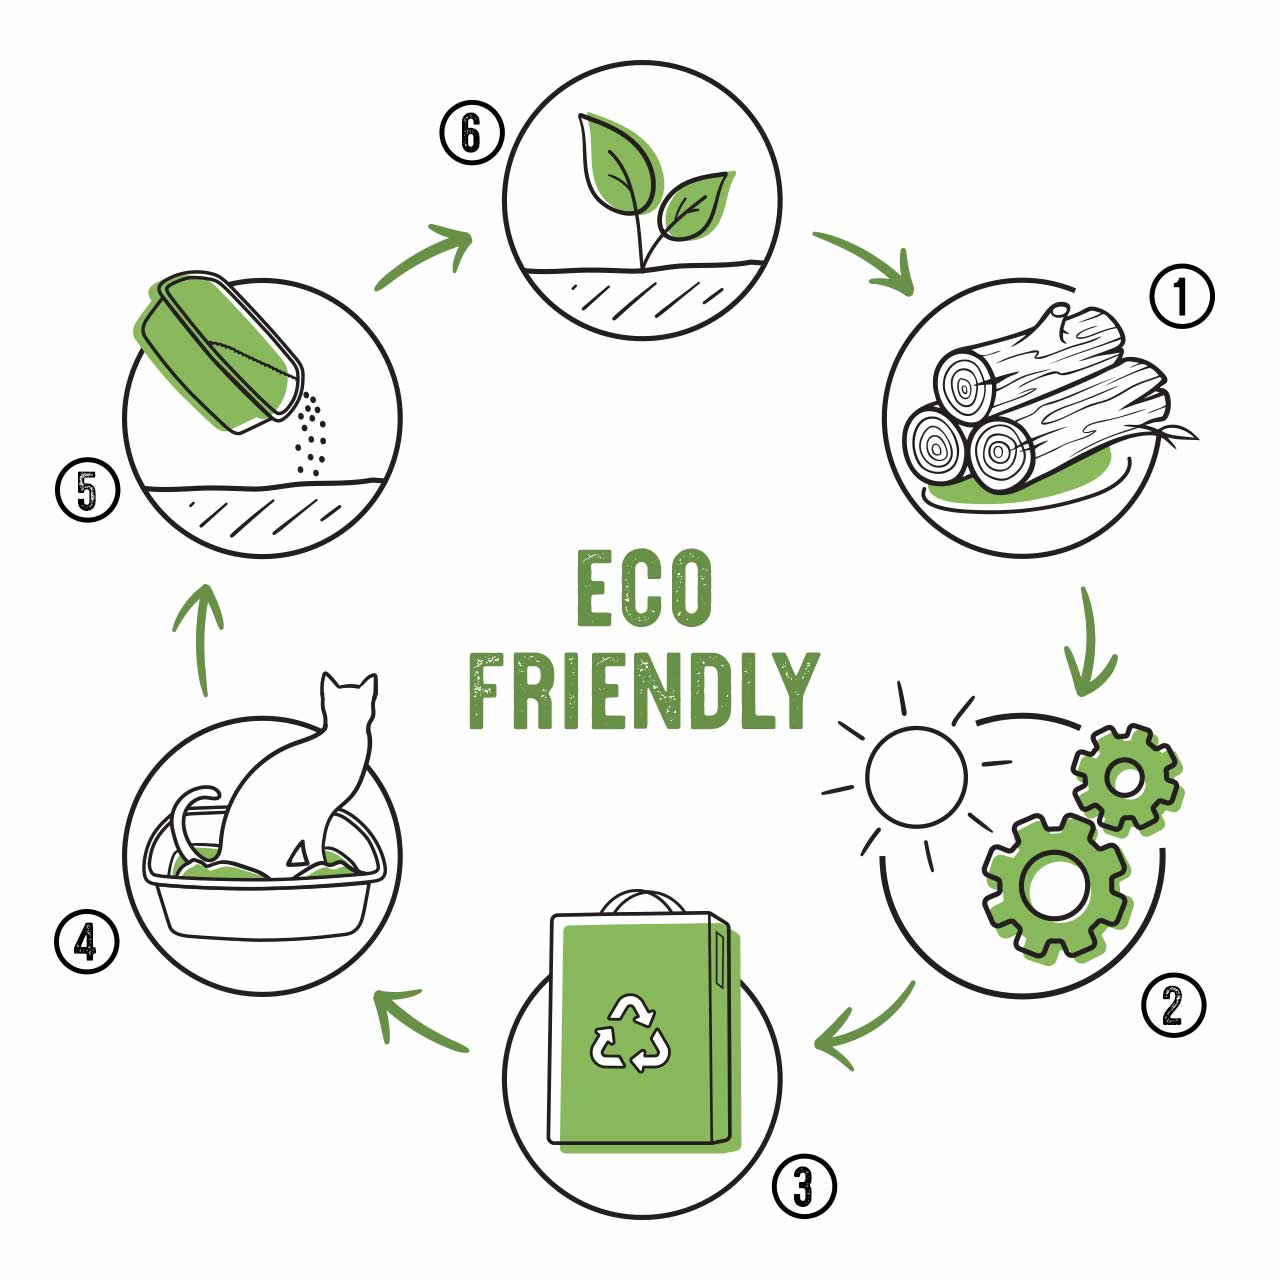 Eco Friendly life cycle